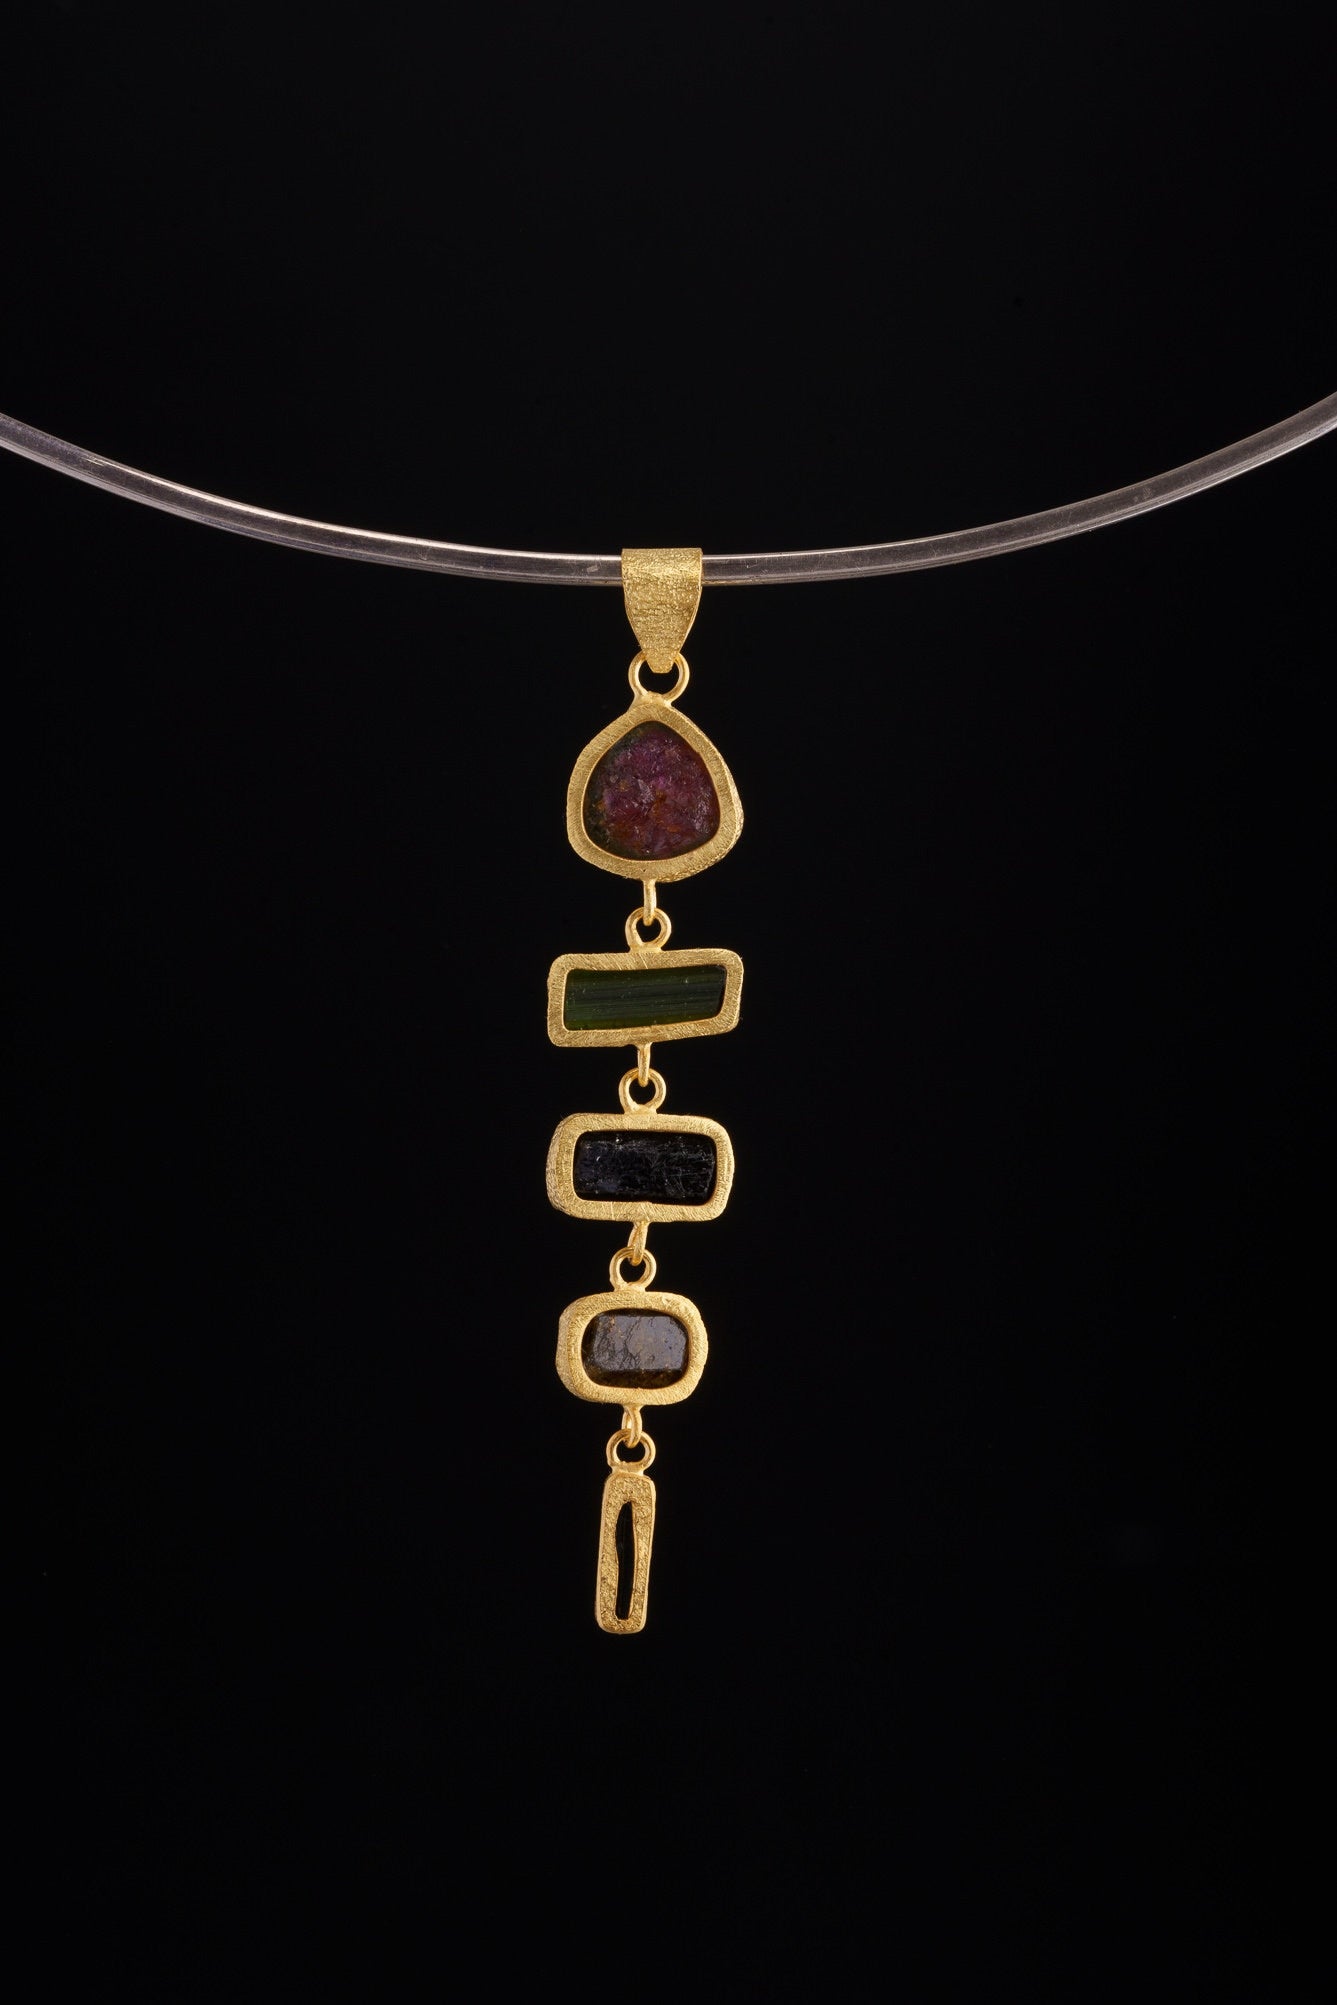 Rainbow Tourmaline Pendant in Textured 18 Carat Gold-Plated Sterling Silver, Six Unique Gemmy Tourmaline Crystals, Dangling Gold Charm